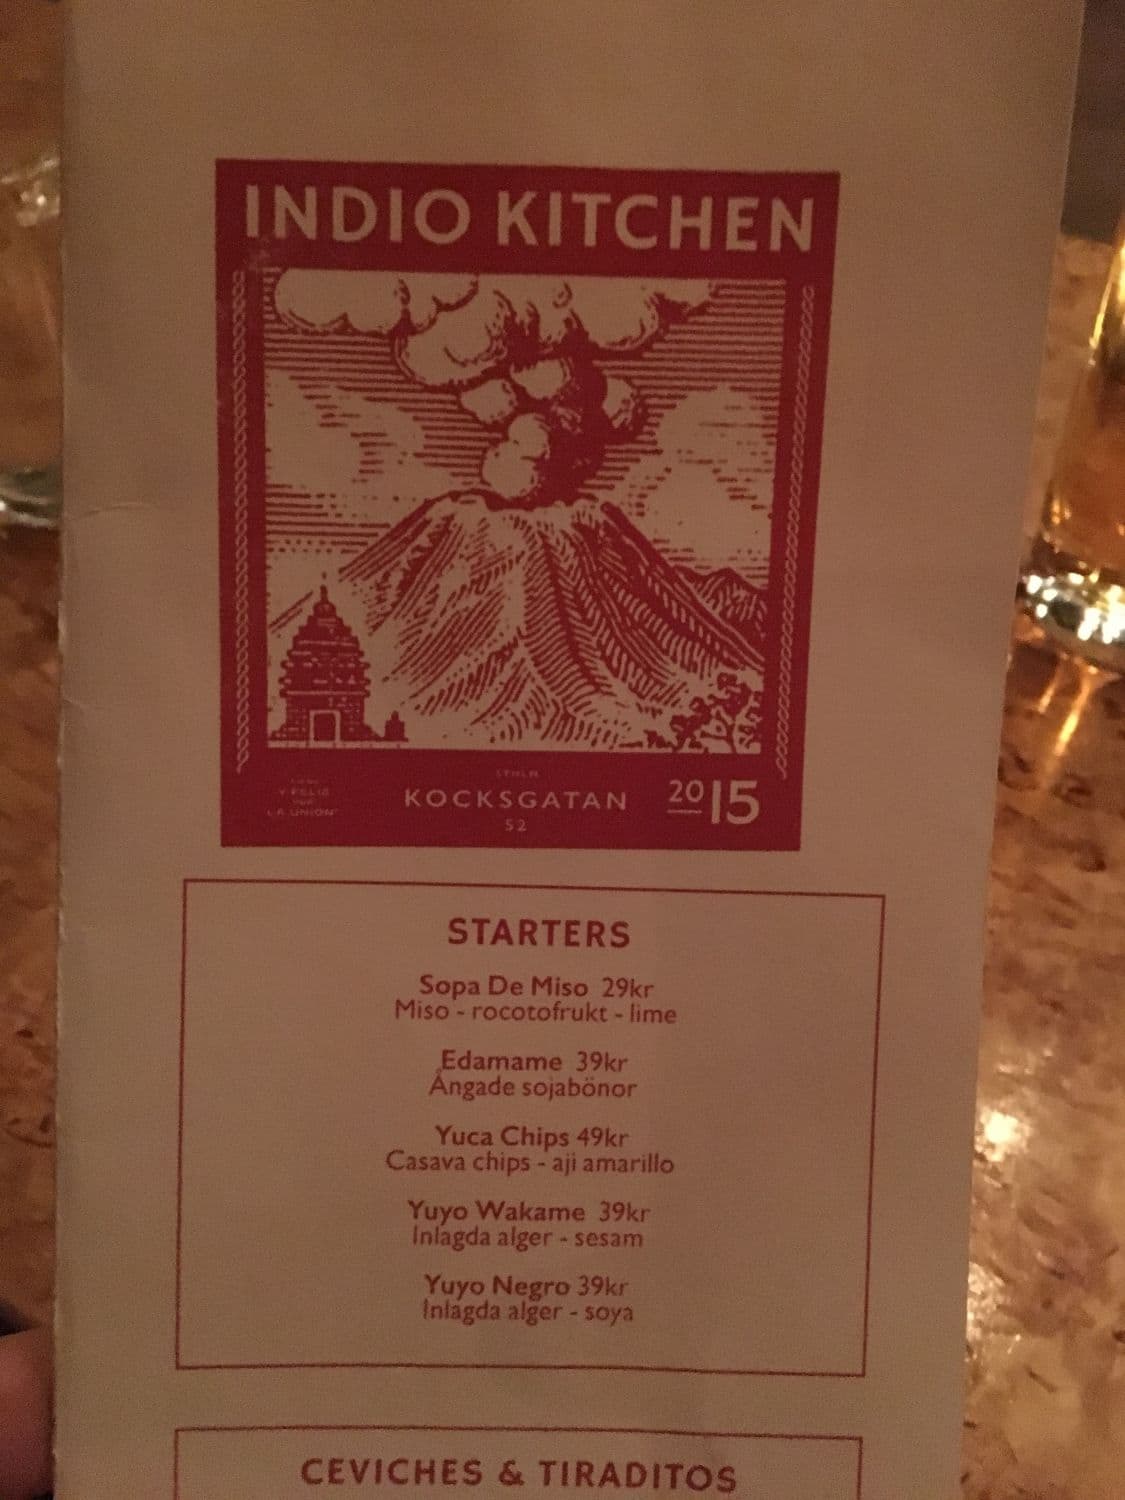 Photo from Indio Kitchen by Jacob H. (16/04/2017)